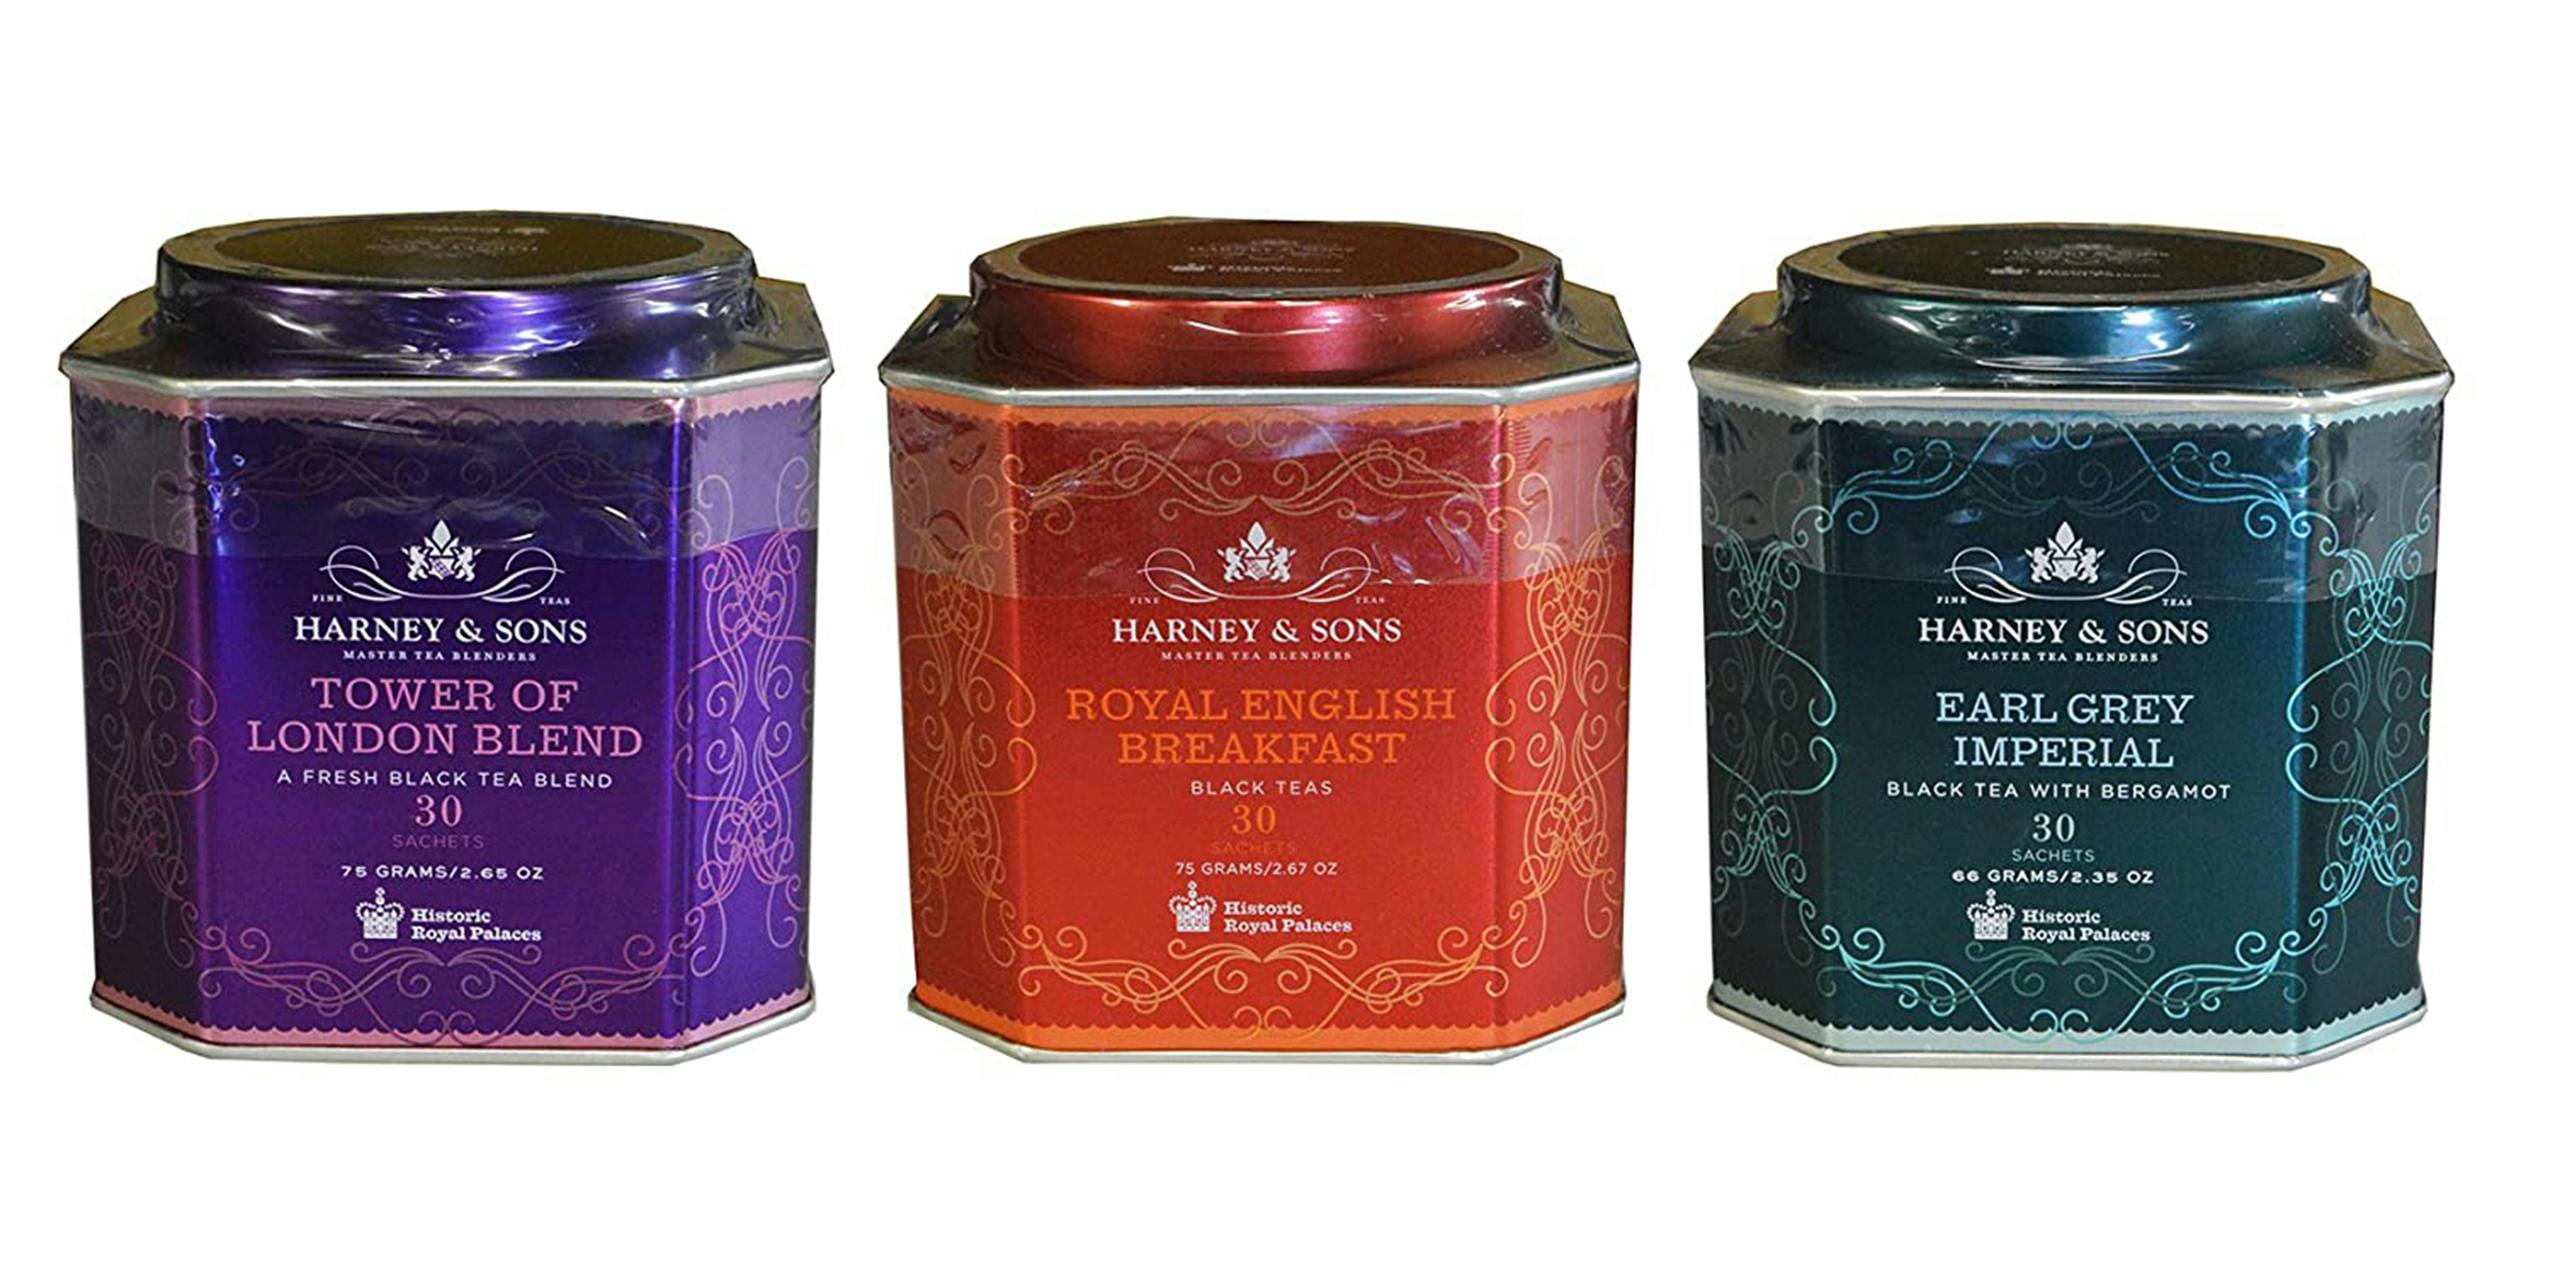 Selection of tea blends between Harney and Sons Royal Palaces.